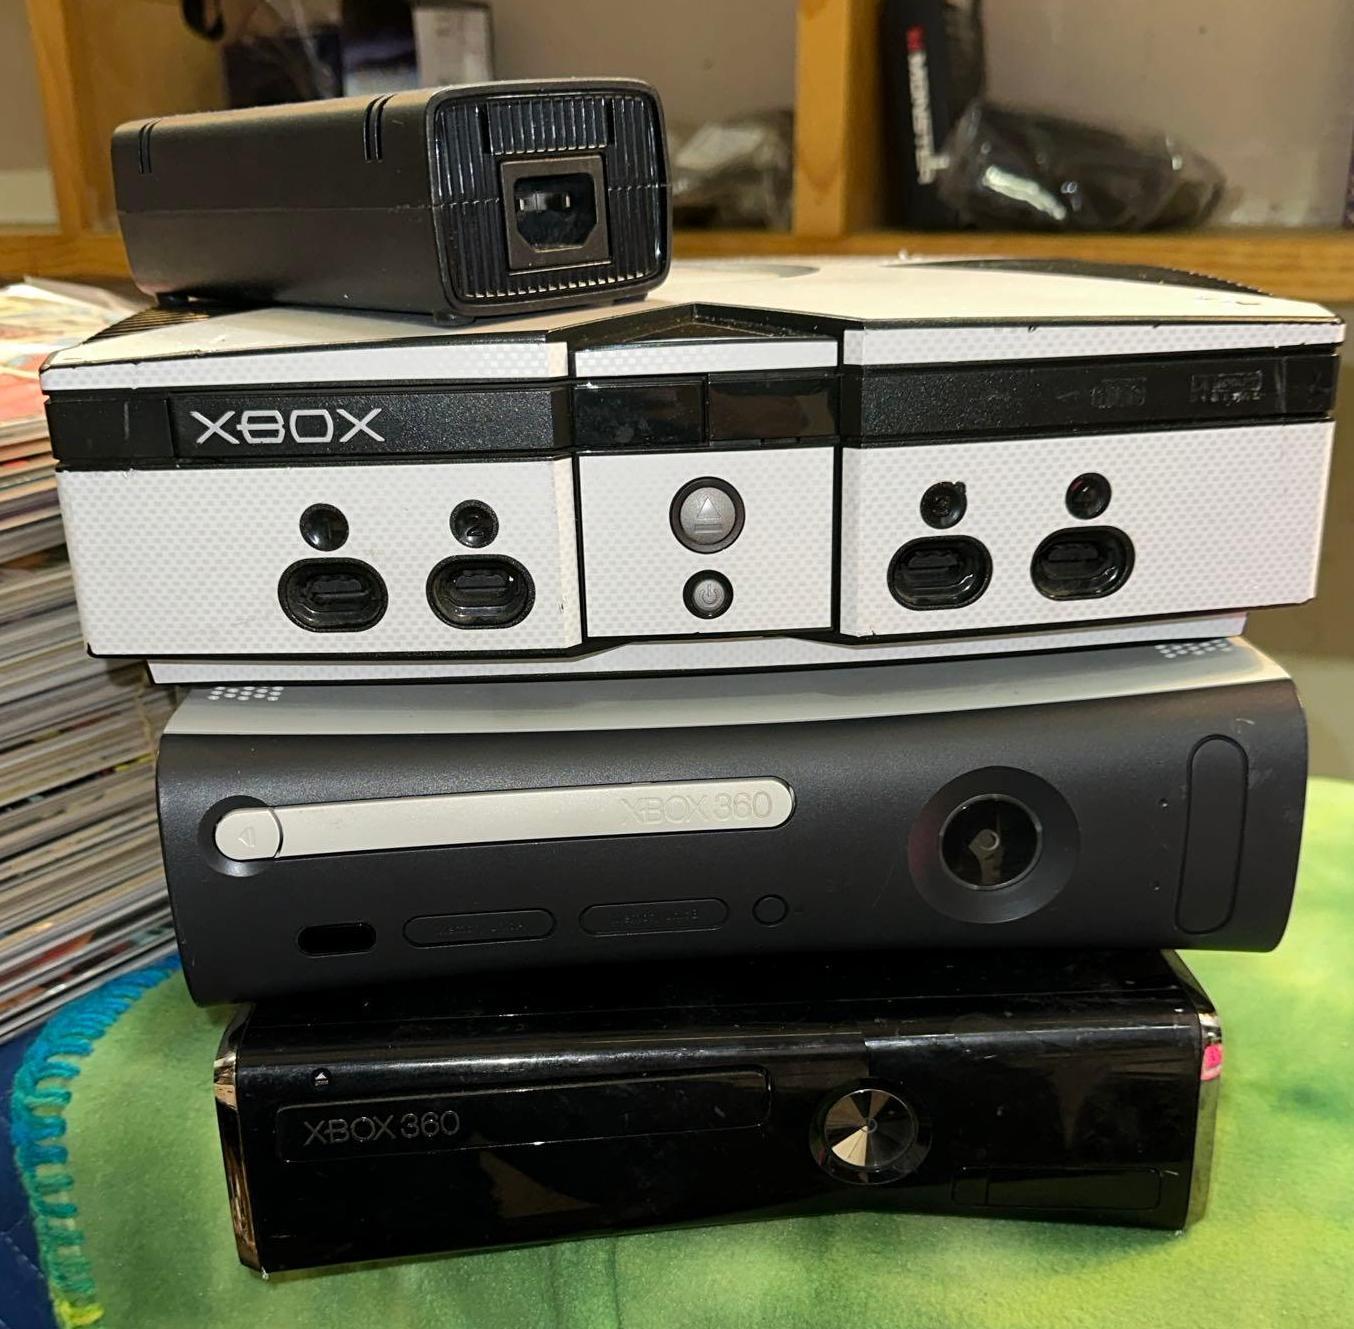 2 XBOX 360 and Xbox Video Game Console